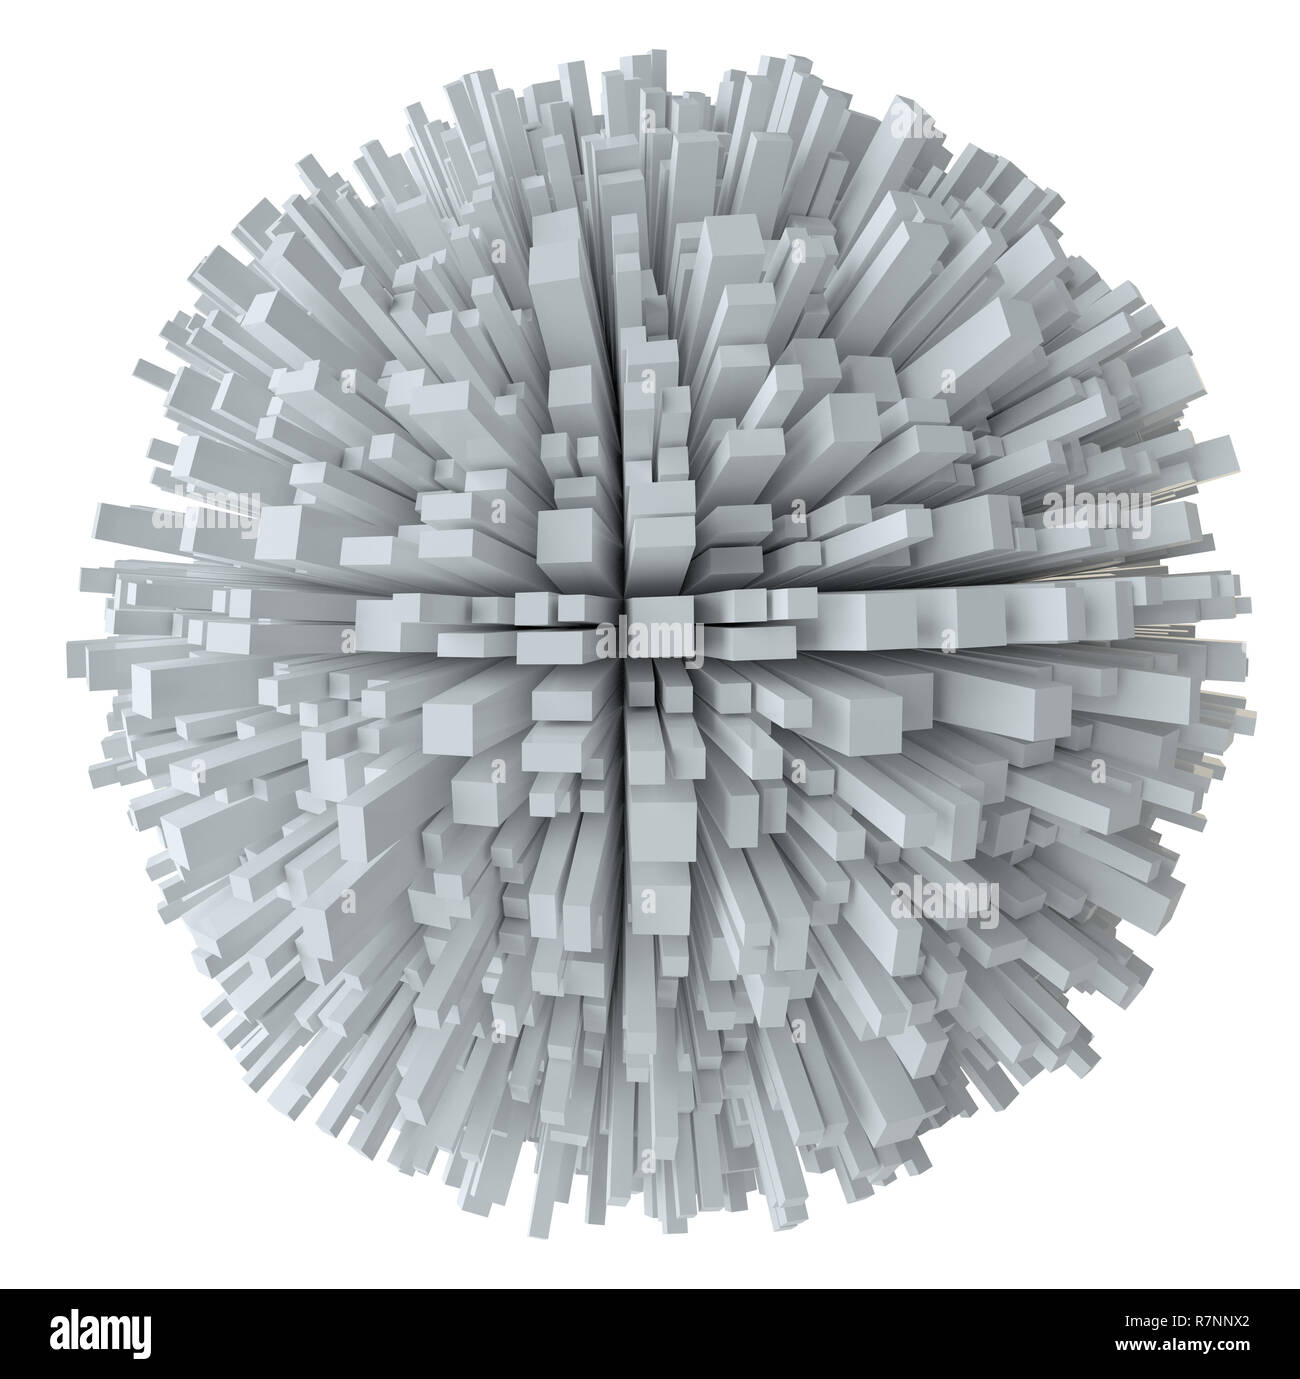 Abstract White Sphere With Cubes Stock Photo